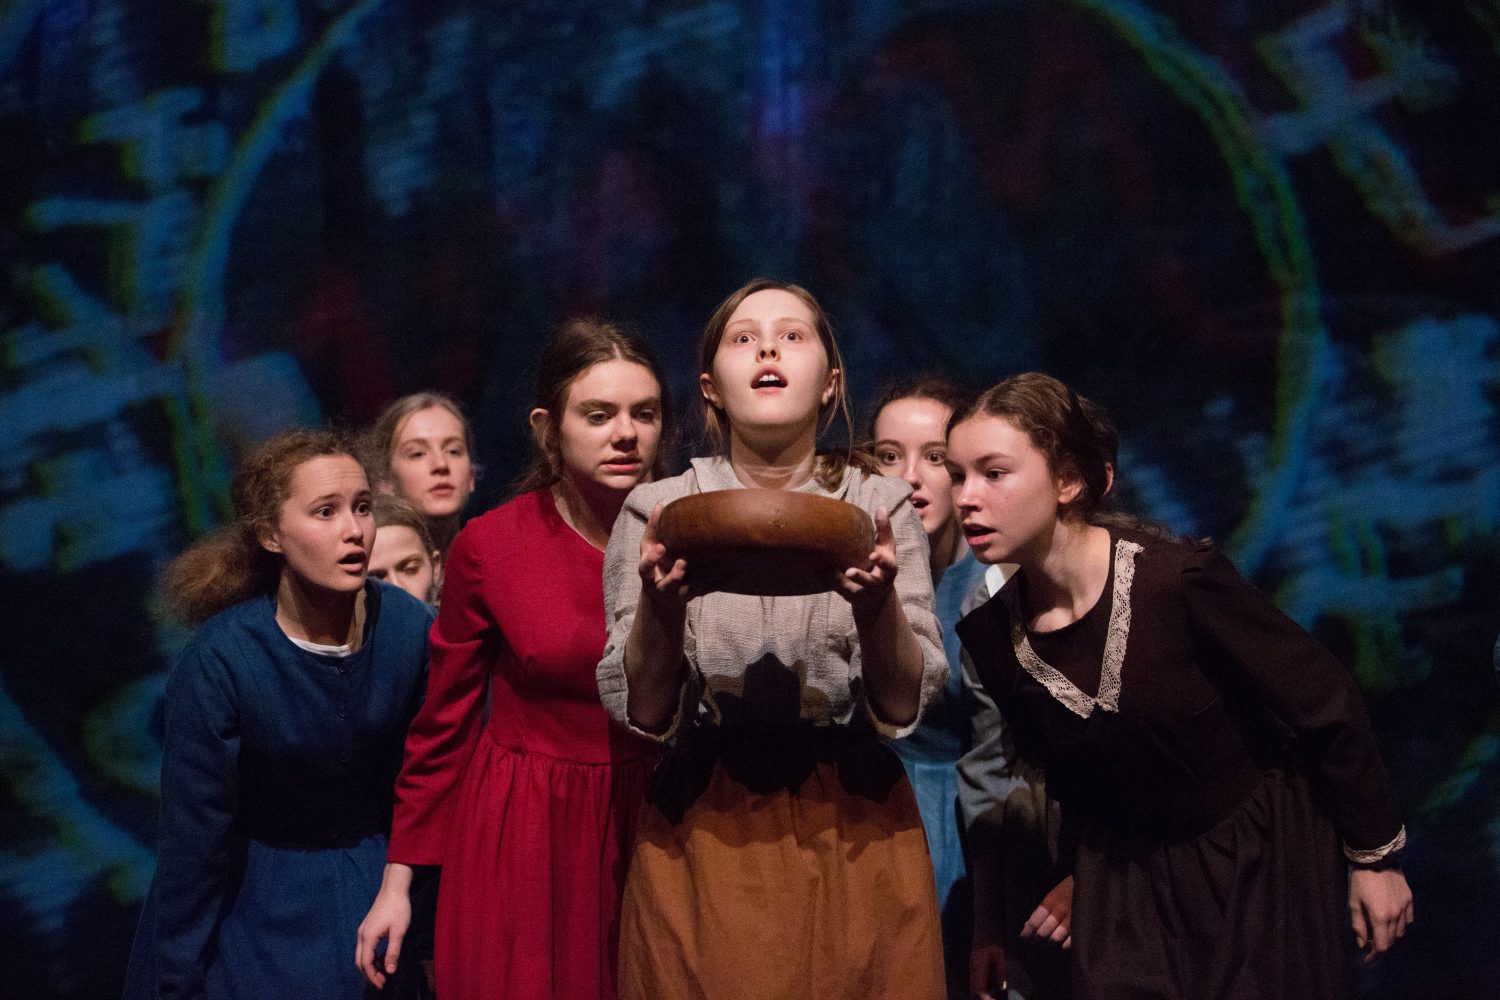 Pupils from St Catherine’s, Guildford in a production of The Crucible